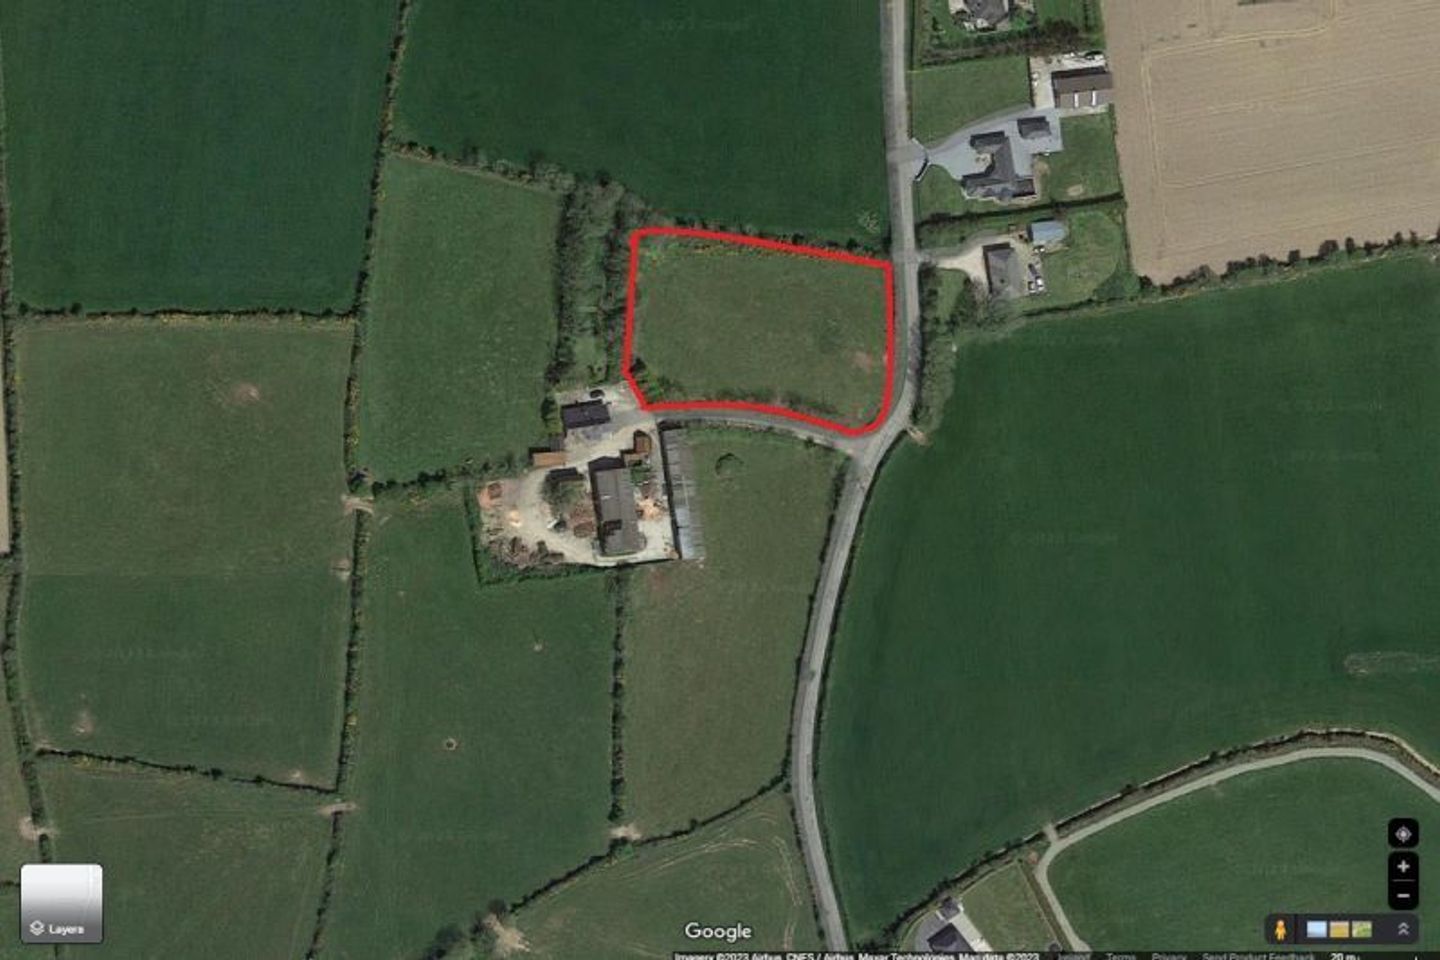 c. 1.5 Acre Site (FPP) at Cleariestown South, Aughwilliam, Cleariestown, Co. Wexford, Y35V653